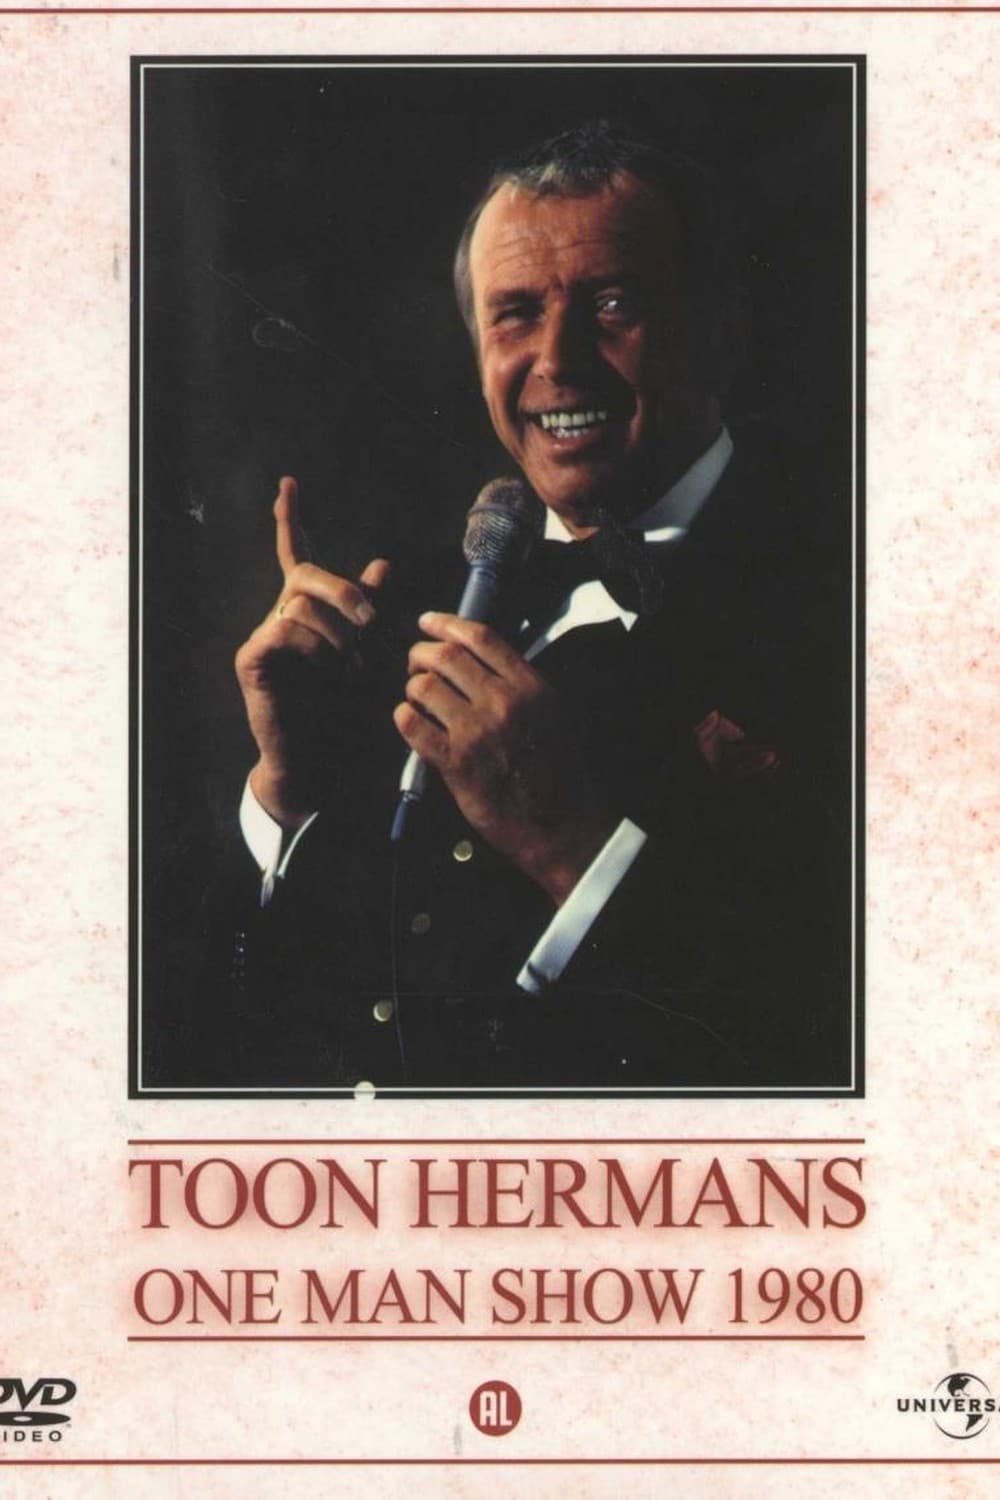 Toon Hermans: One Man Show 1980